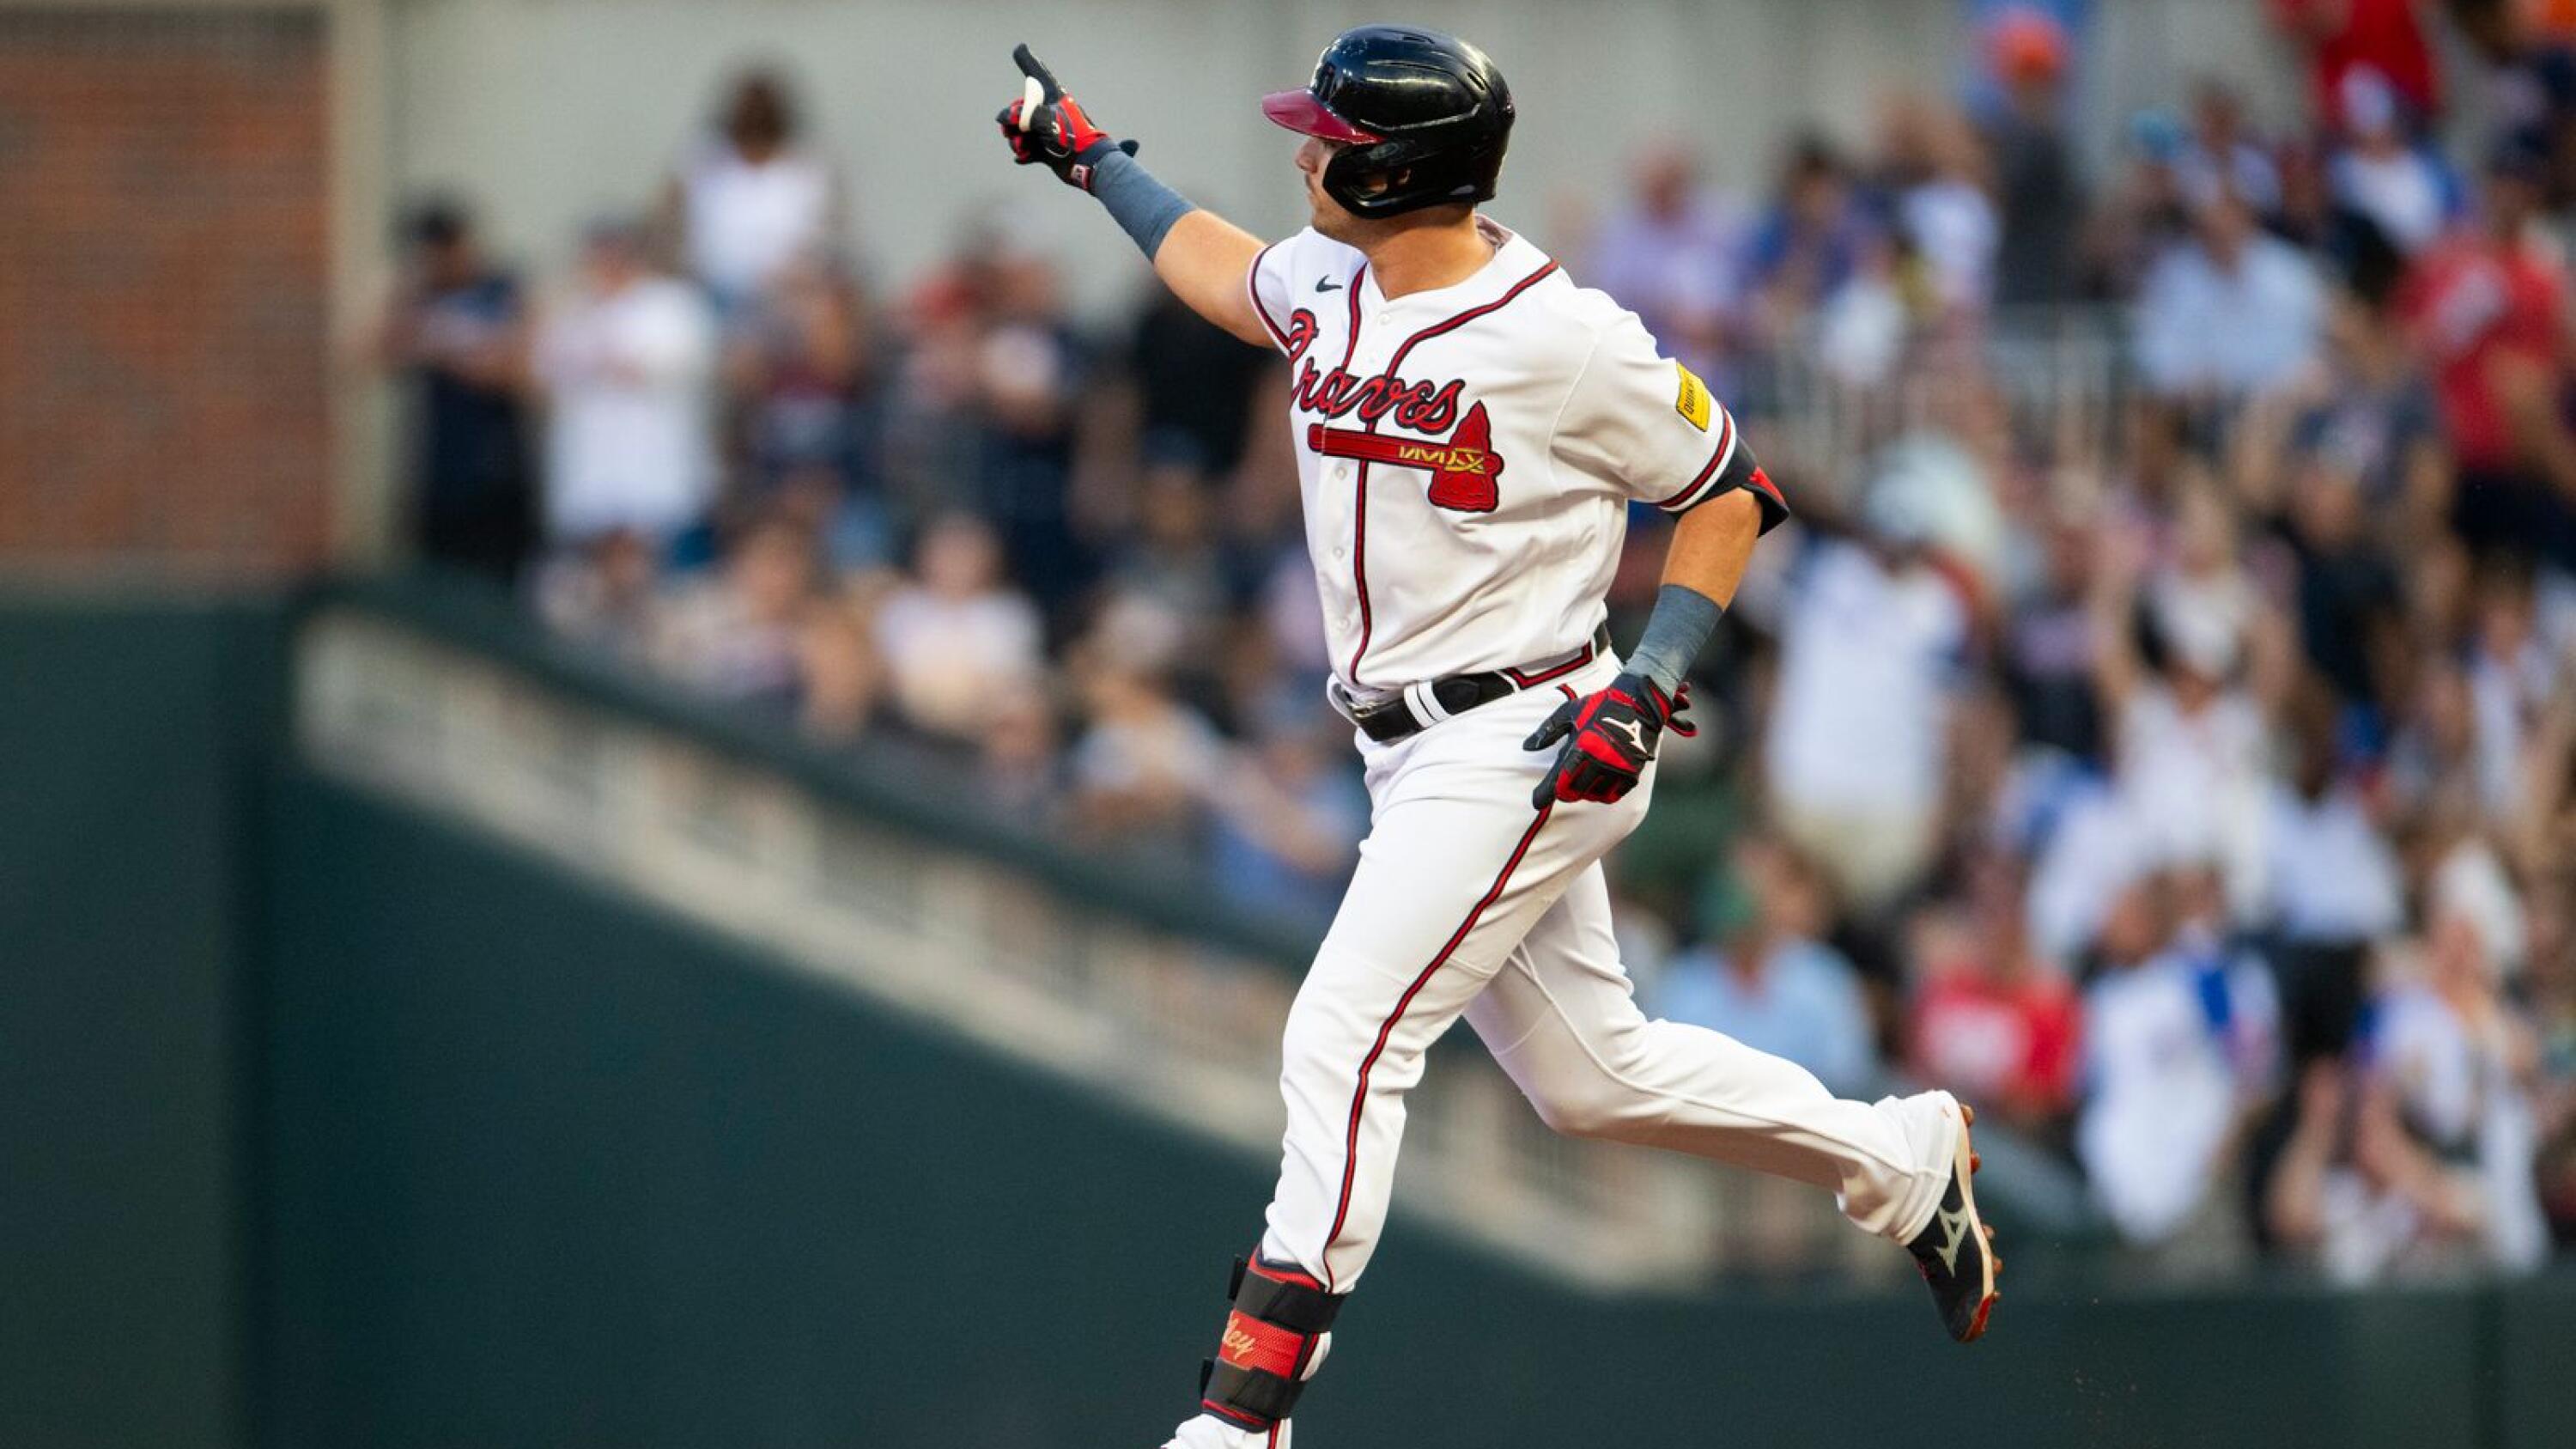 Lopez thrives in fill-in role as Fried, Braves rout Yankees, 11-3